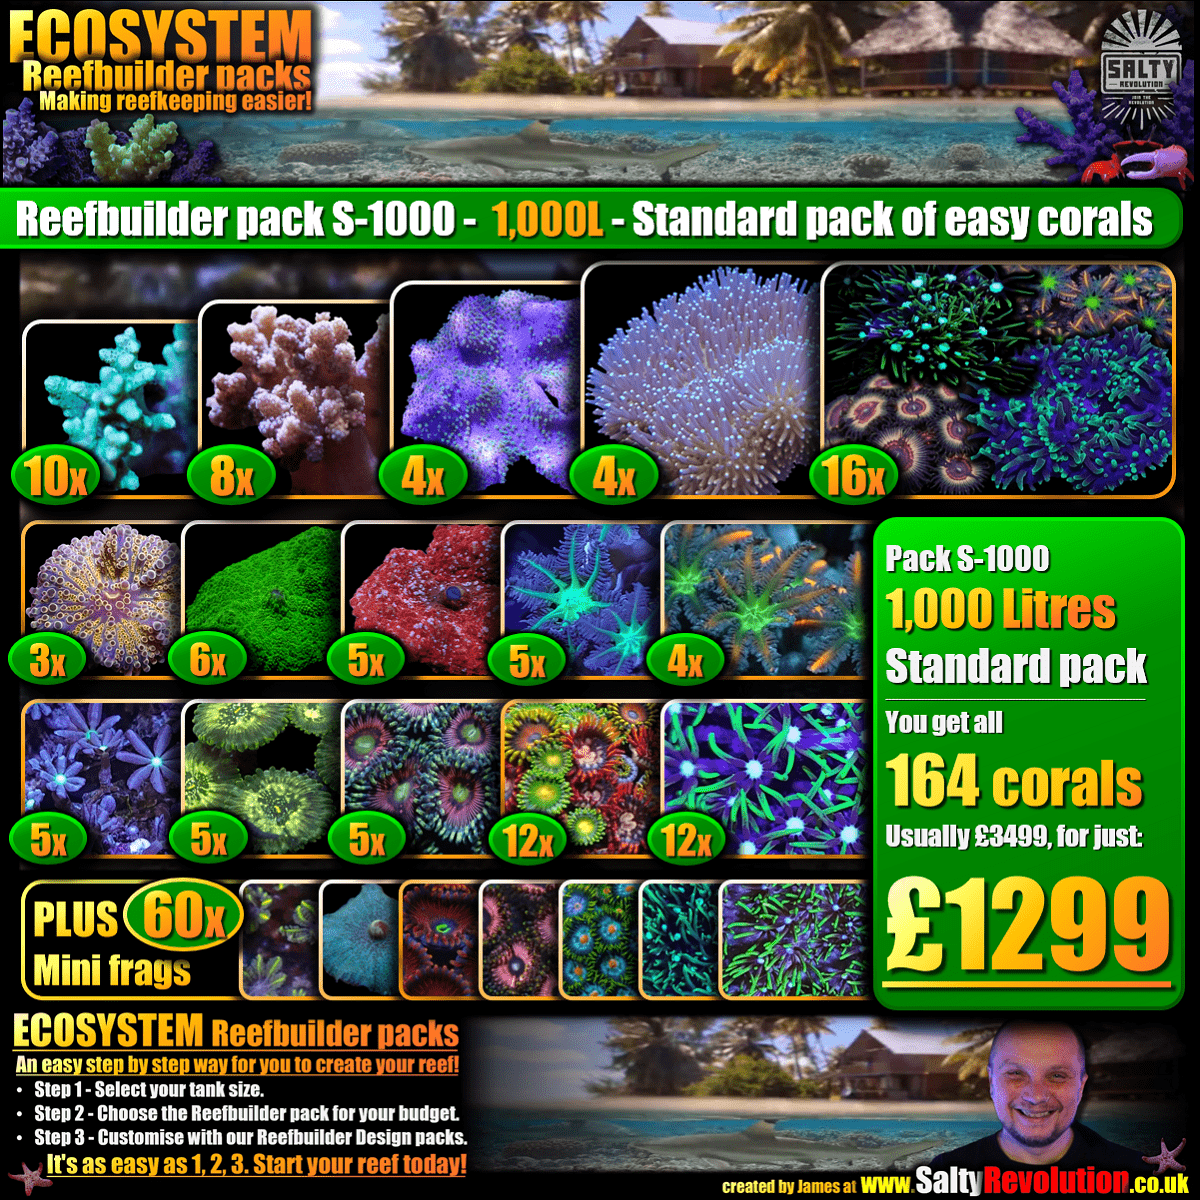 SS - New! - ECOSYSTEM Reefbuilder pack S-1000 - 1,000L Standard pack of easy corals